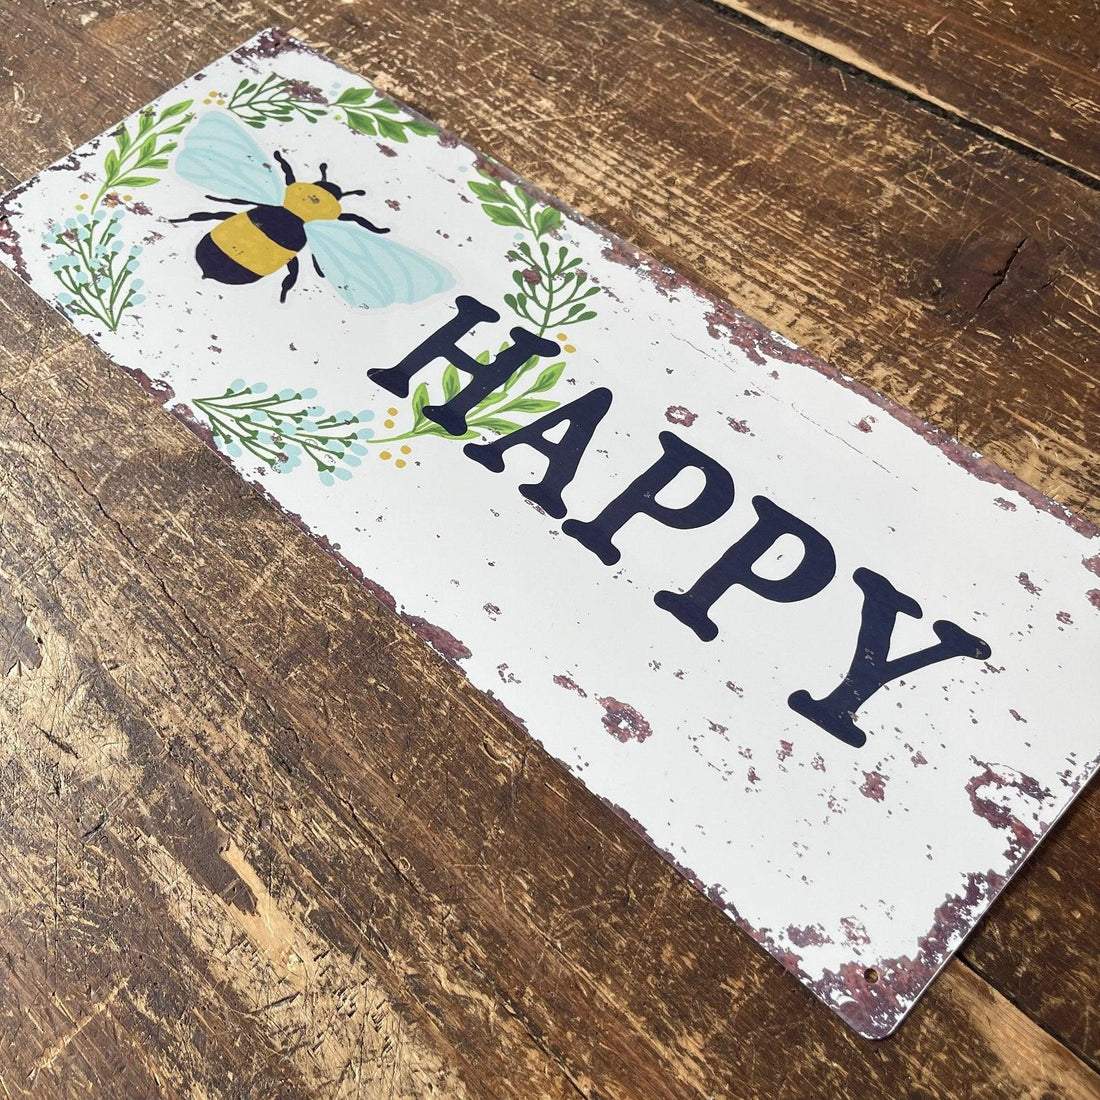 Vintage Metal Sign - Bee Happy Wall Sign - £22.99 - Signs & Rules 